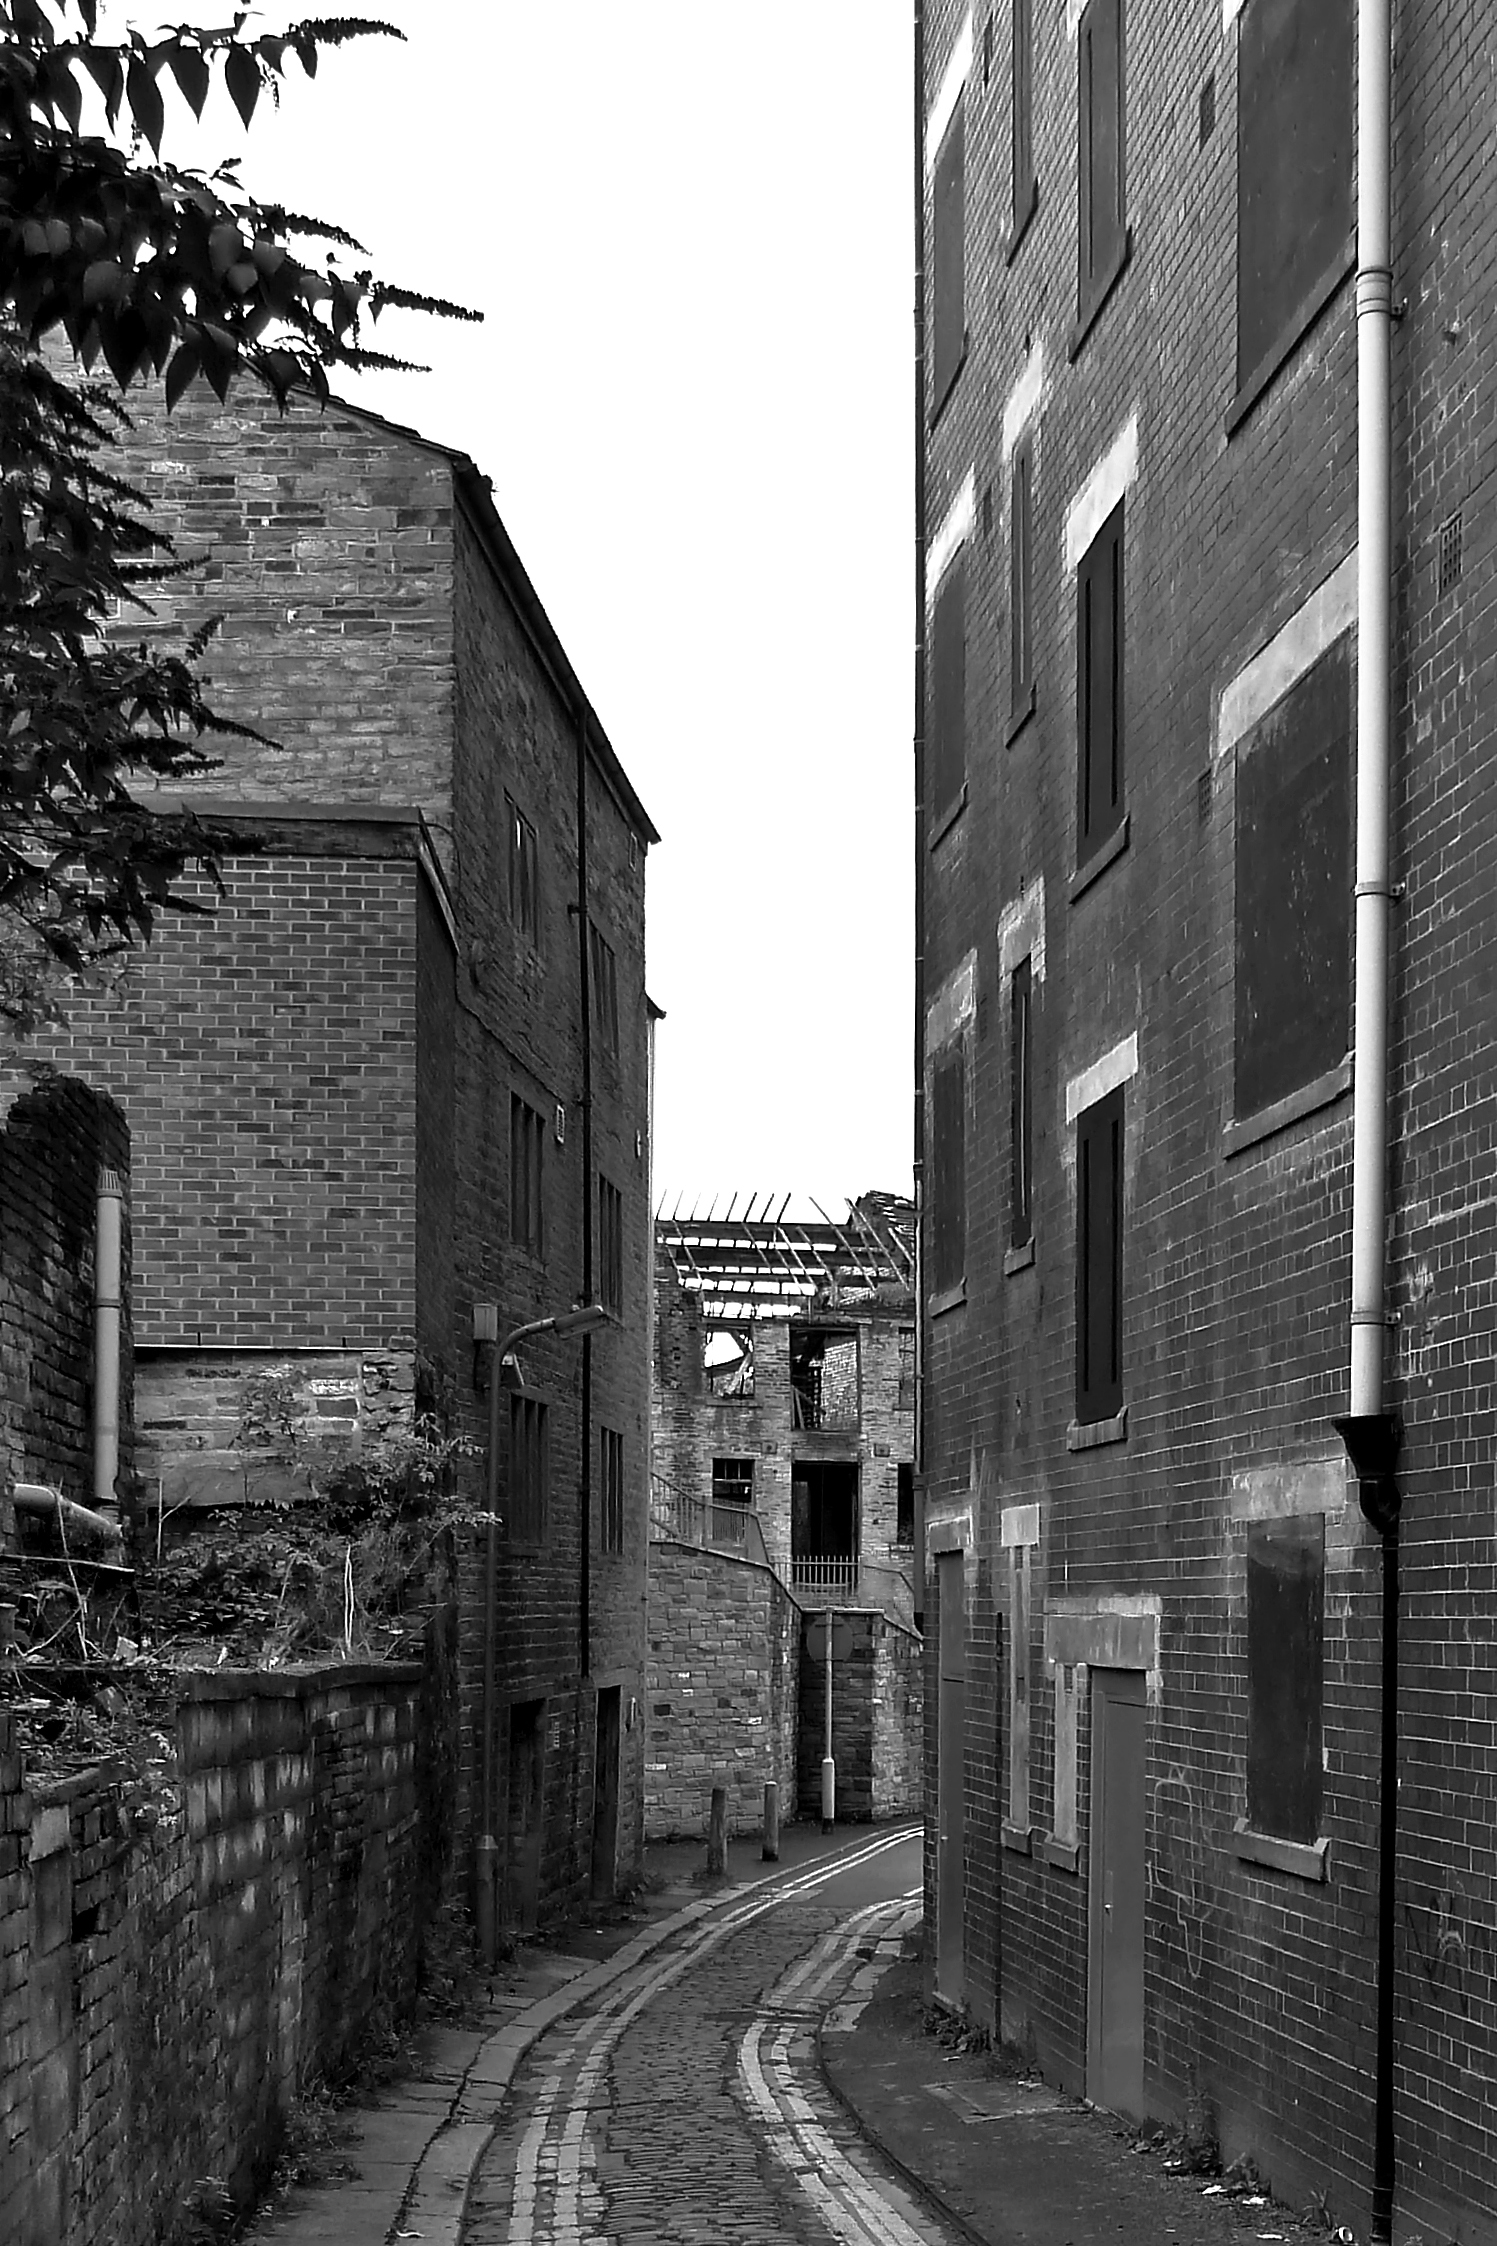 a narrow alley with brick buildings on both sides